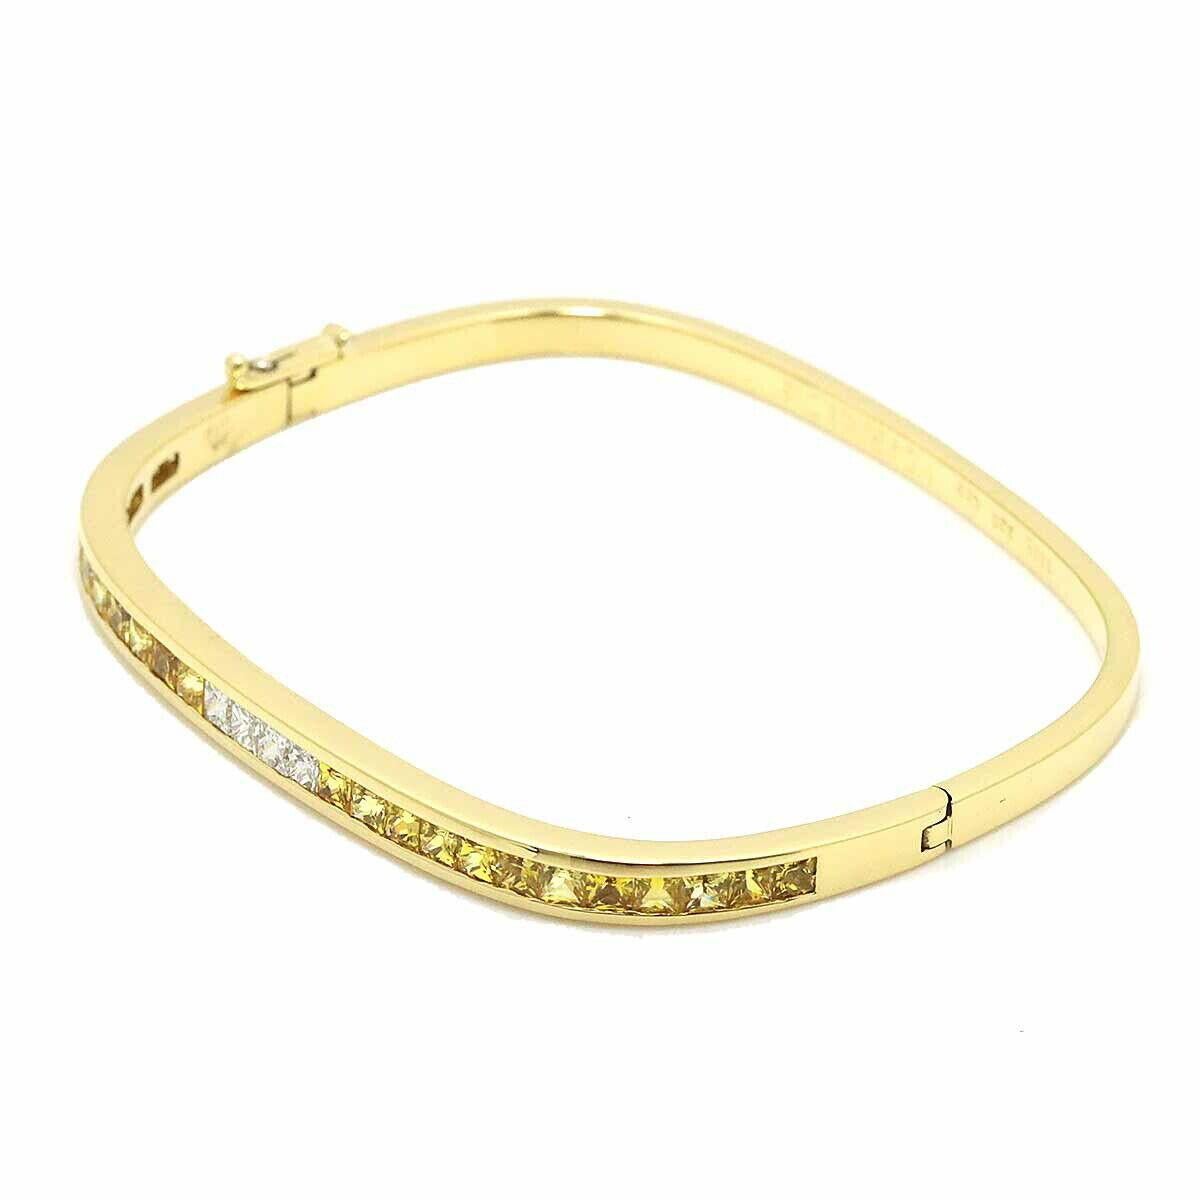 Van Cleef & Arpels 18k Yellow Gold, Yellow Sapphire & Diamond Bangle Bracelet

Here is your chance to purchase a beautiful and highly collectible designer cocktail bracelet.  

Van Cleef Arpels Sapphire 3.20ct Diamond 0.48ct Bracelet 18K YG 750